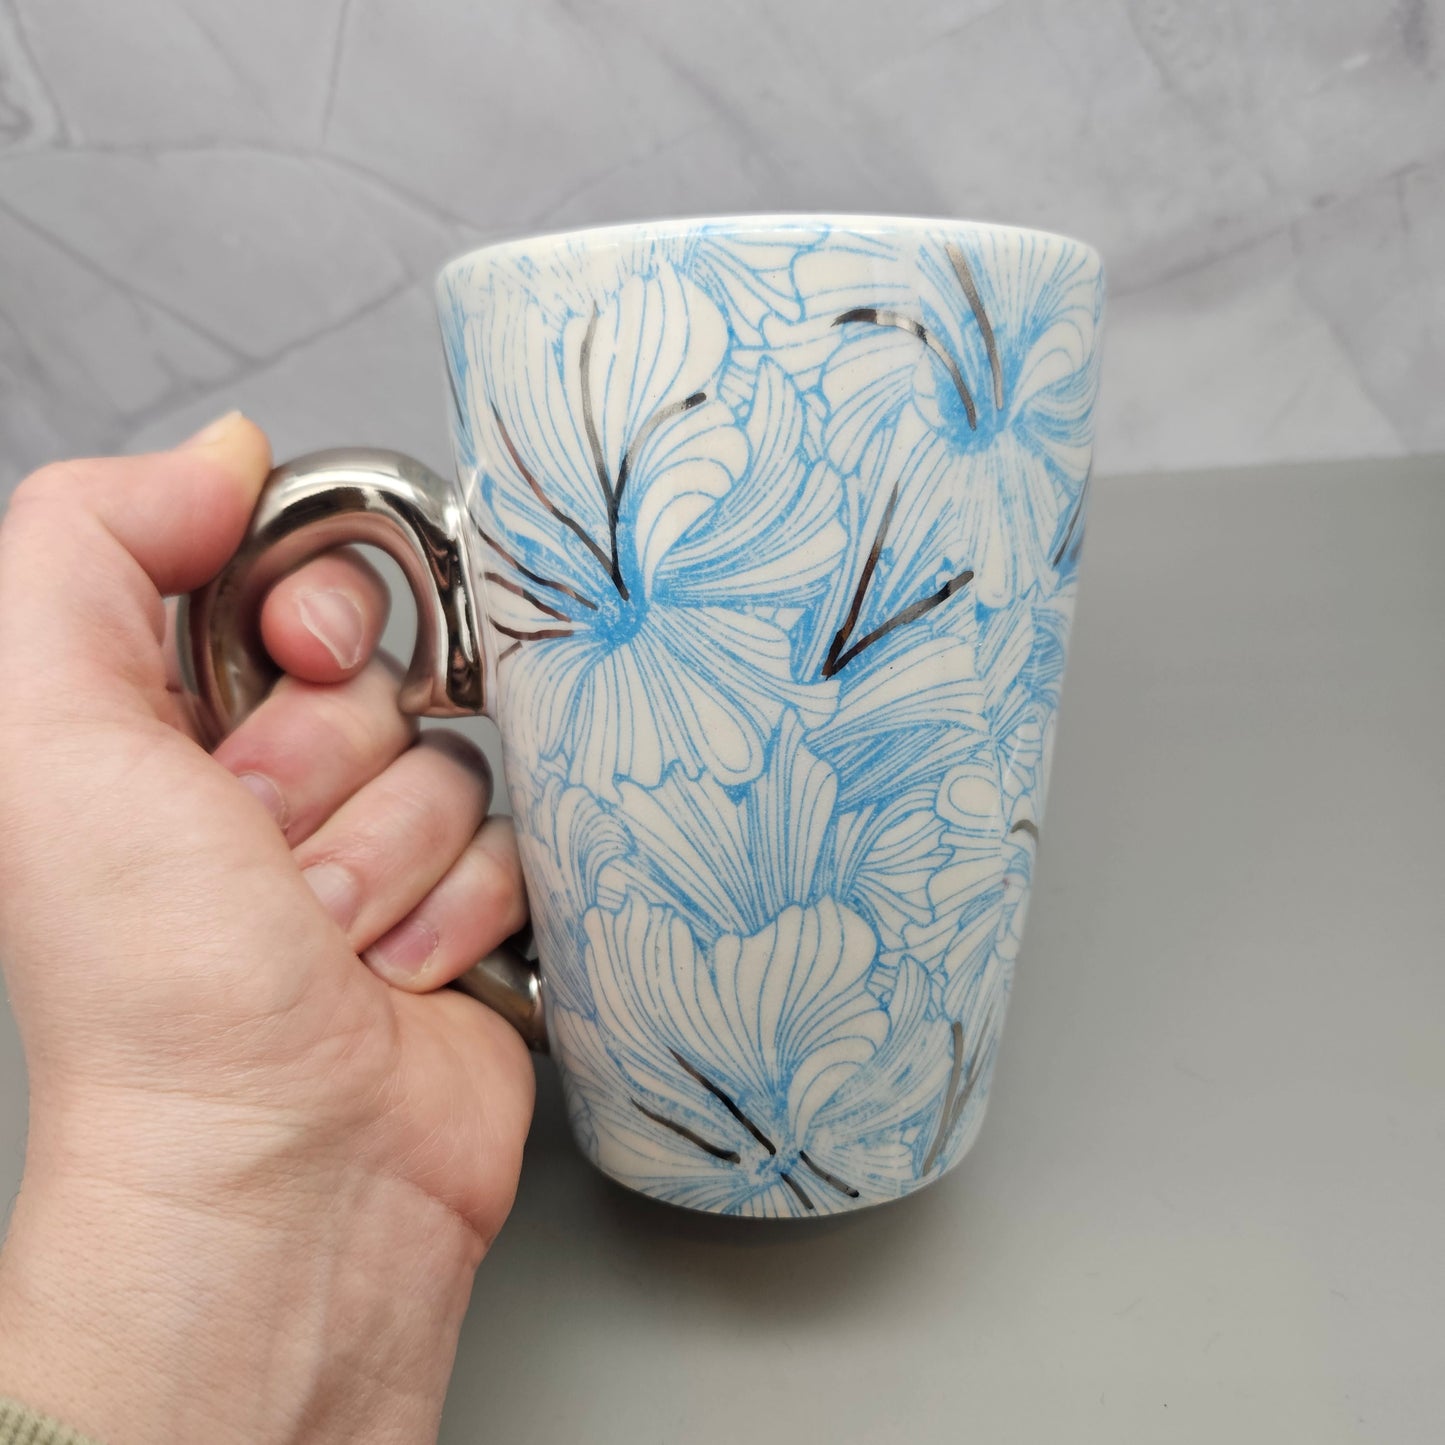 Light blue hibiscus print mug with 22k white gold handle and accents, 14 oz